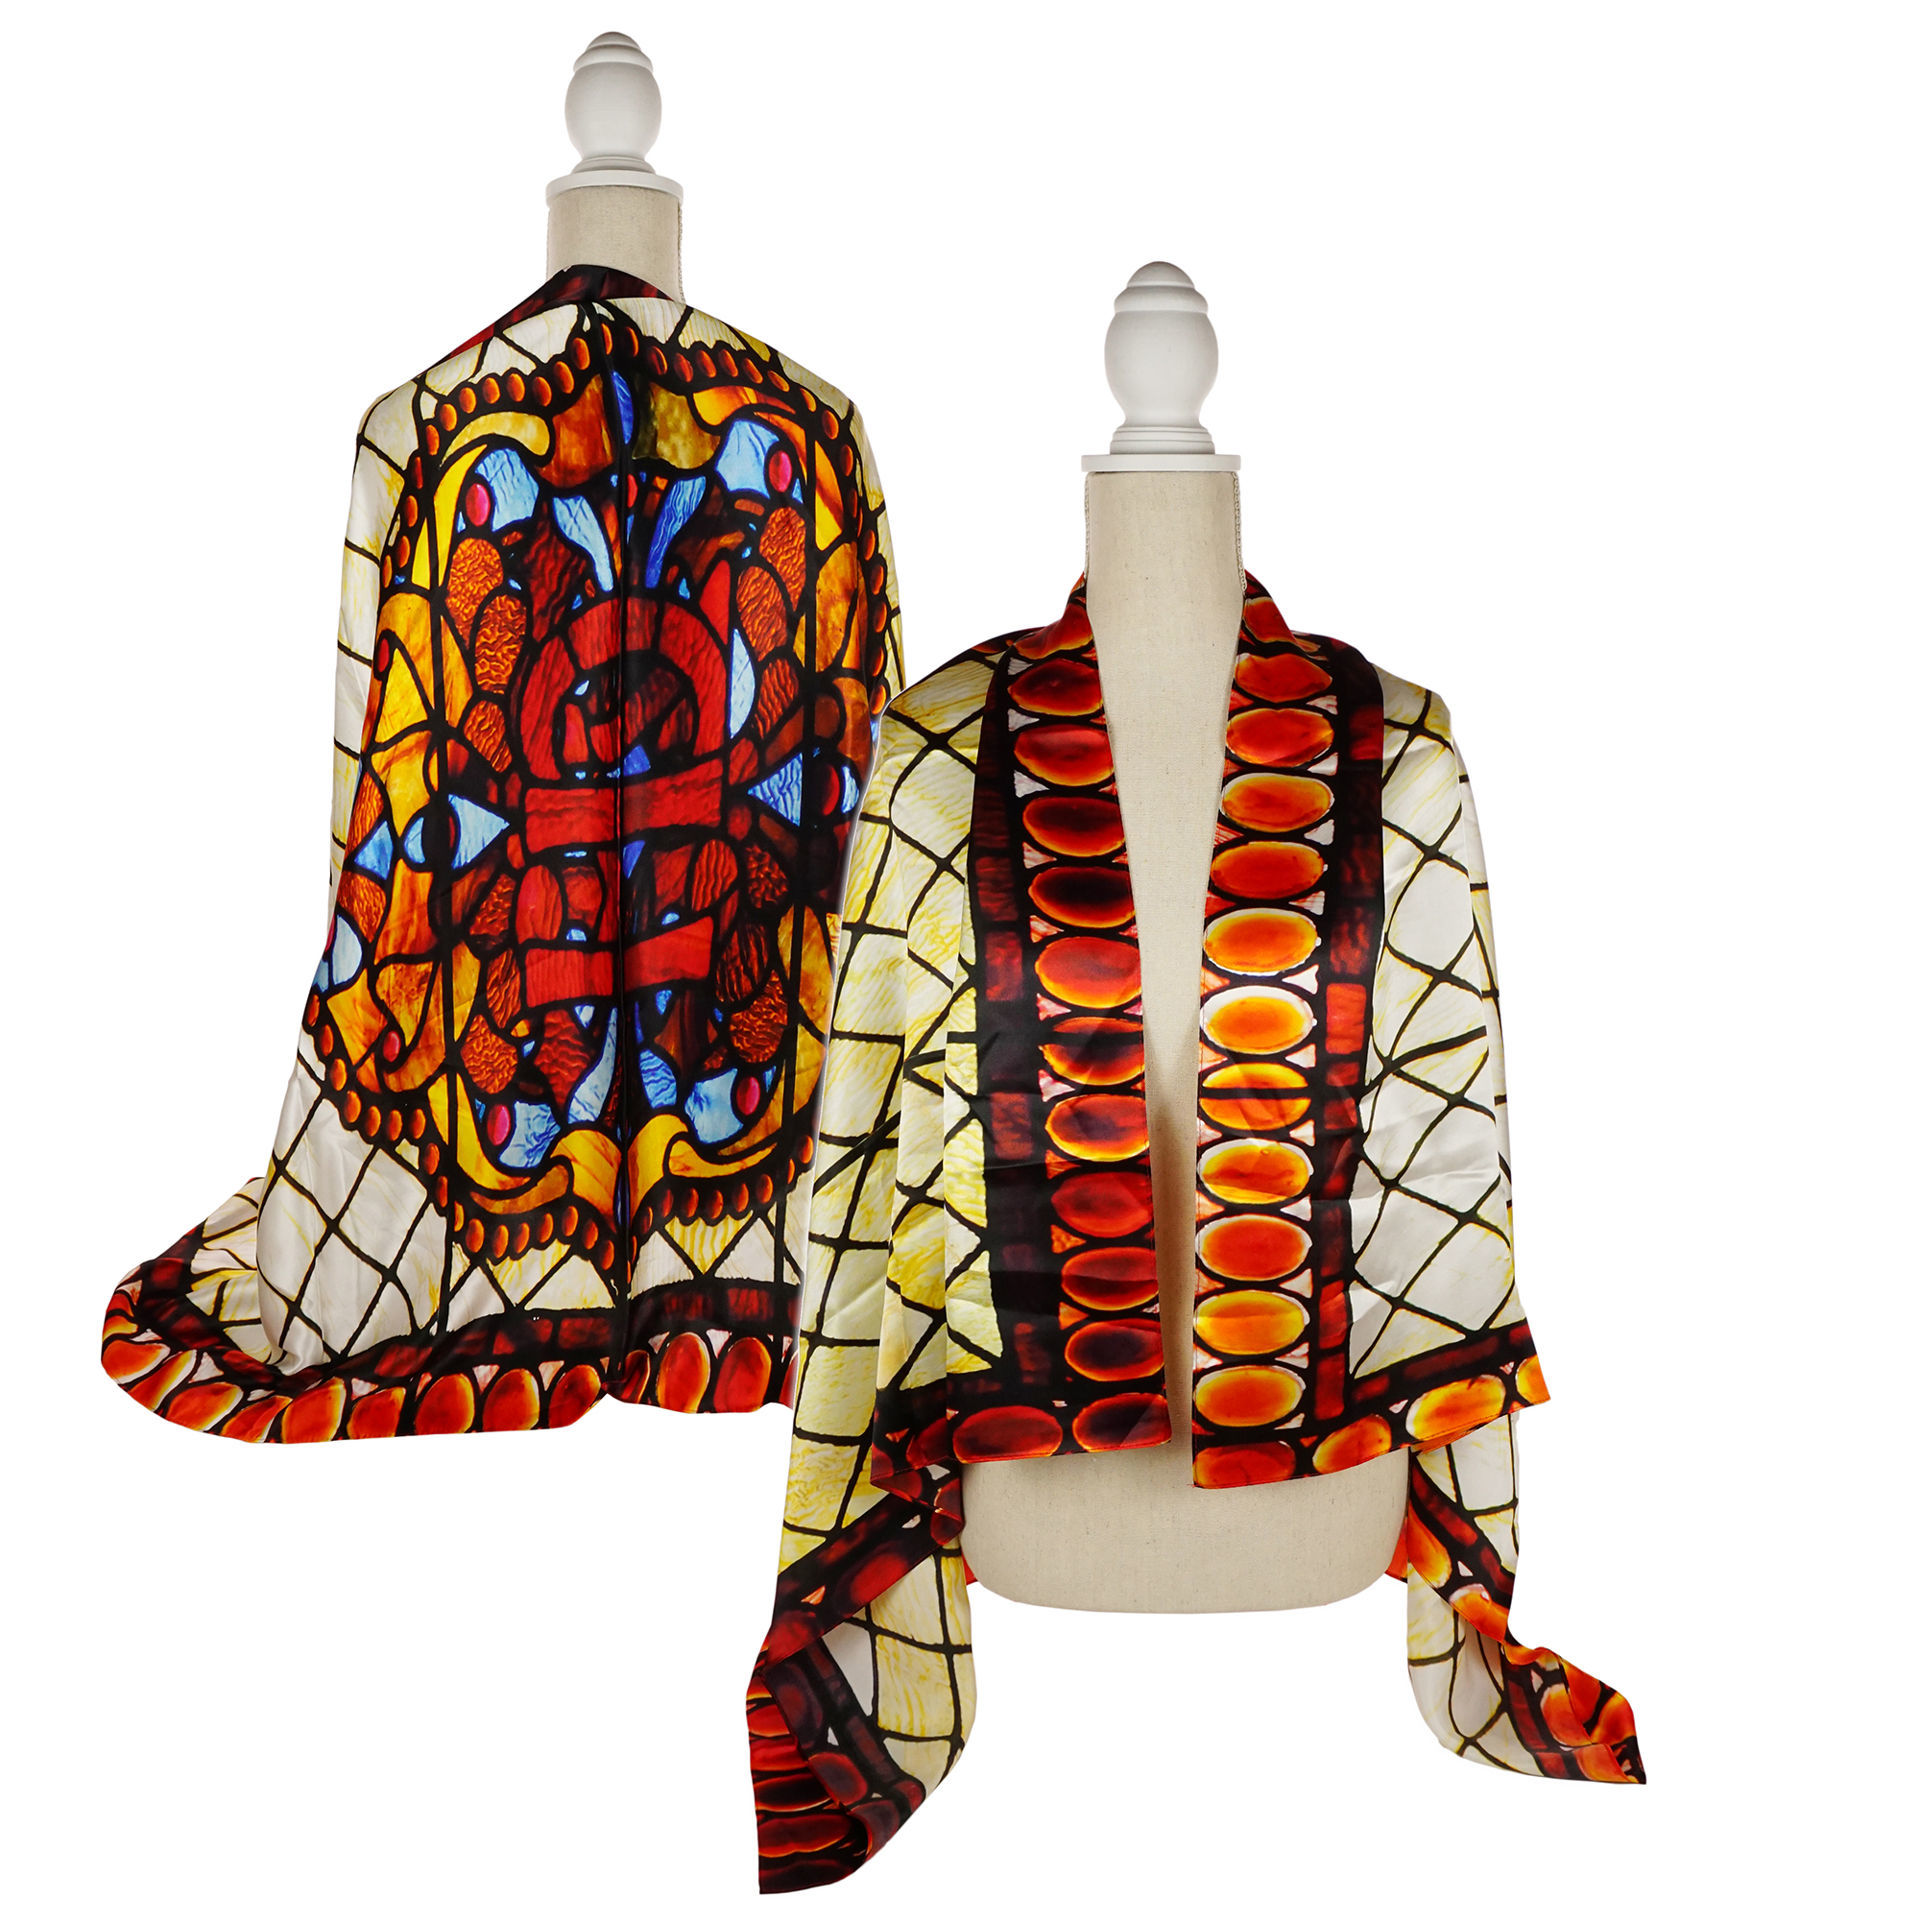 a mulitcolored scarf in the style of window stained glass is shown from the front and the back. The colors are red, orange, and a beigey yellow, with some blue in the center. It is very shiny.